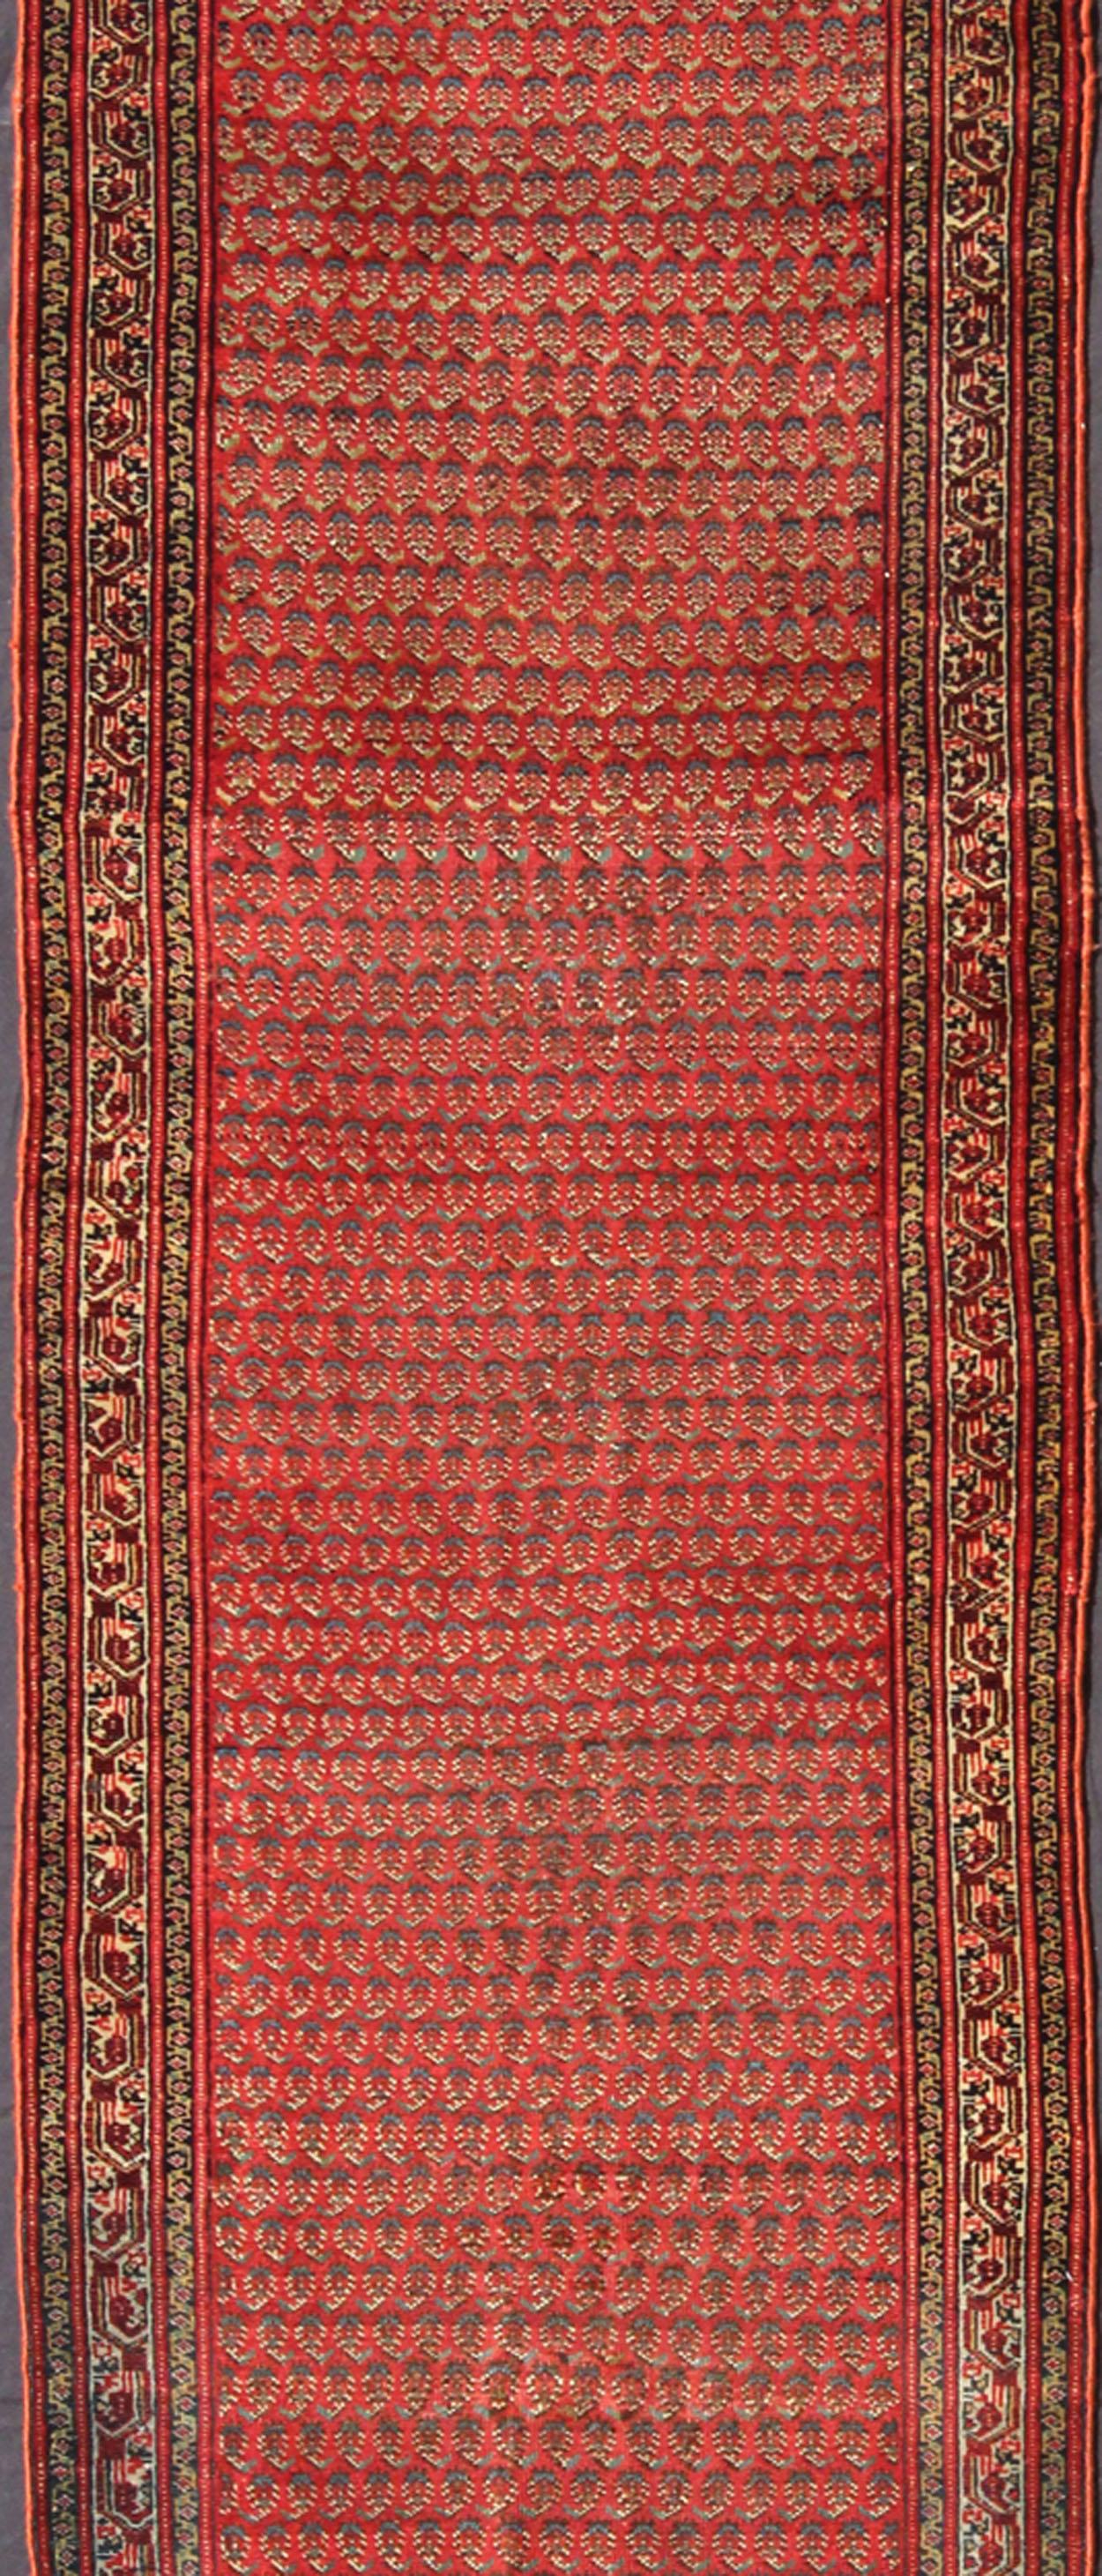 Measures: 3'1 x 21'3

This antique Persian Saraband gallery runner features an all-over paisley pattern set on a light red, rust red background and surrounded by multiple  borders with hints of green and ivory.

Country of Origin: Iran; Type: